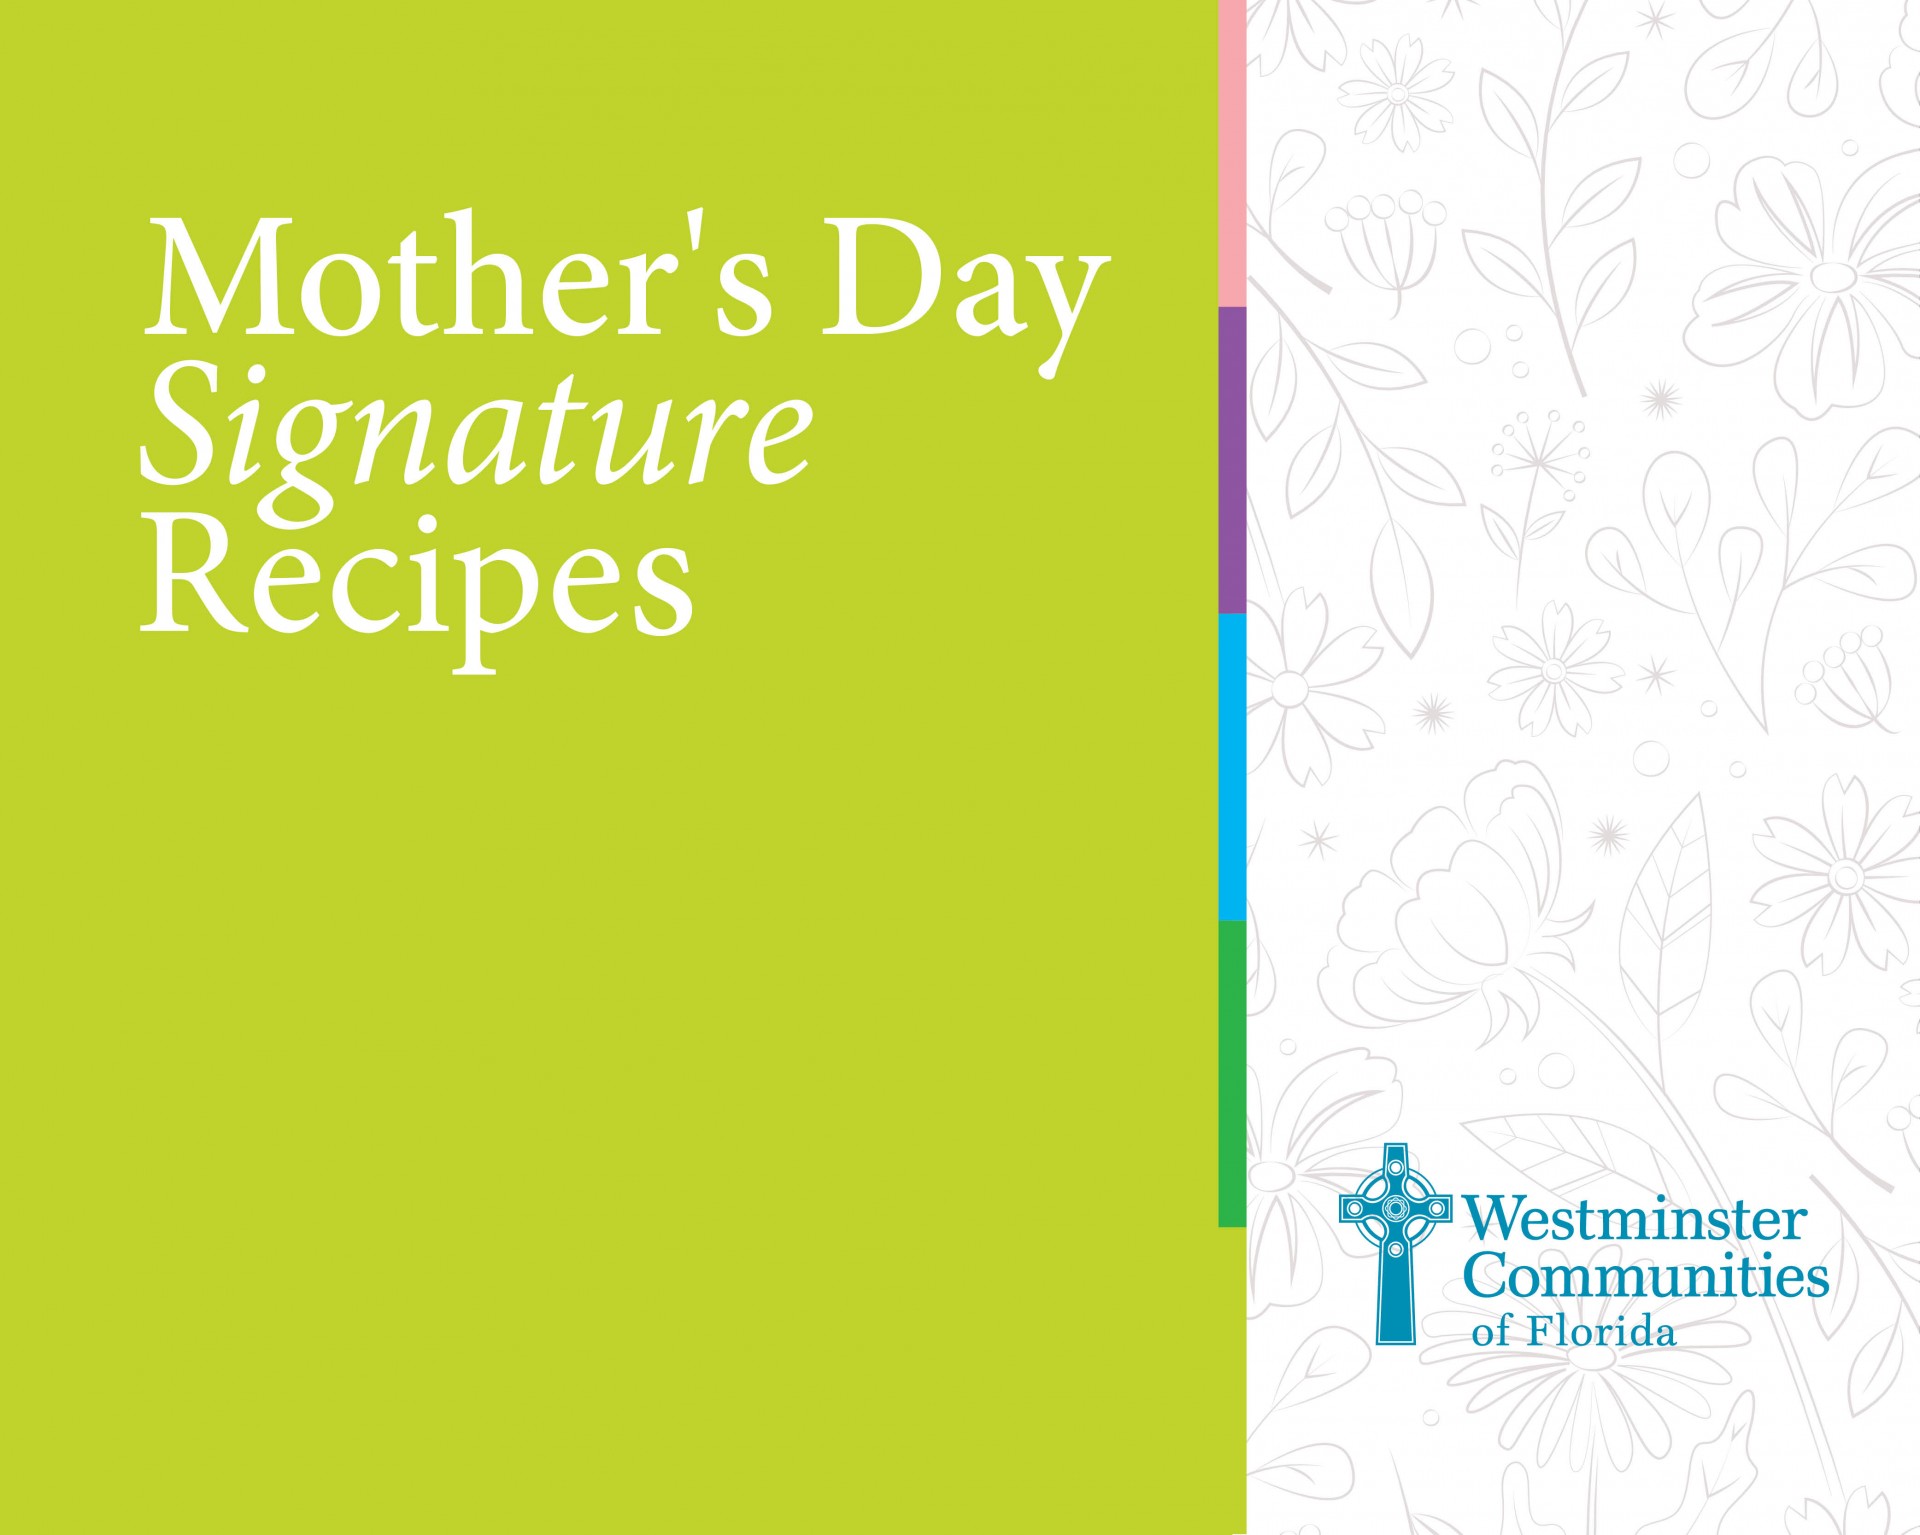 Mother's Day Signature Recipes